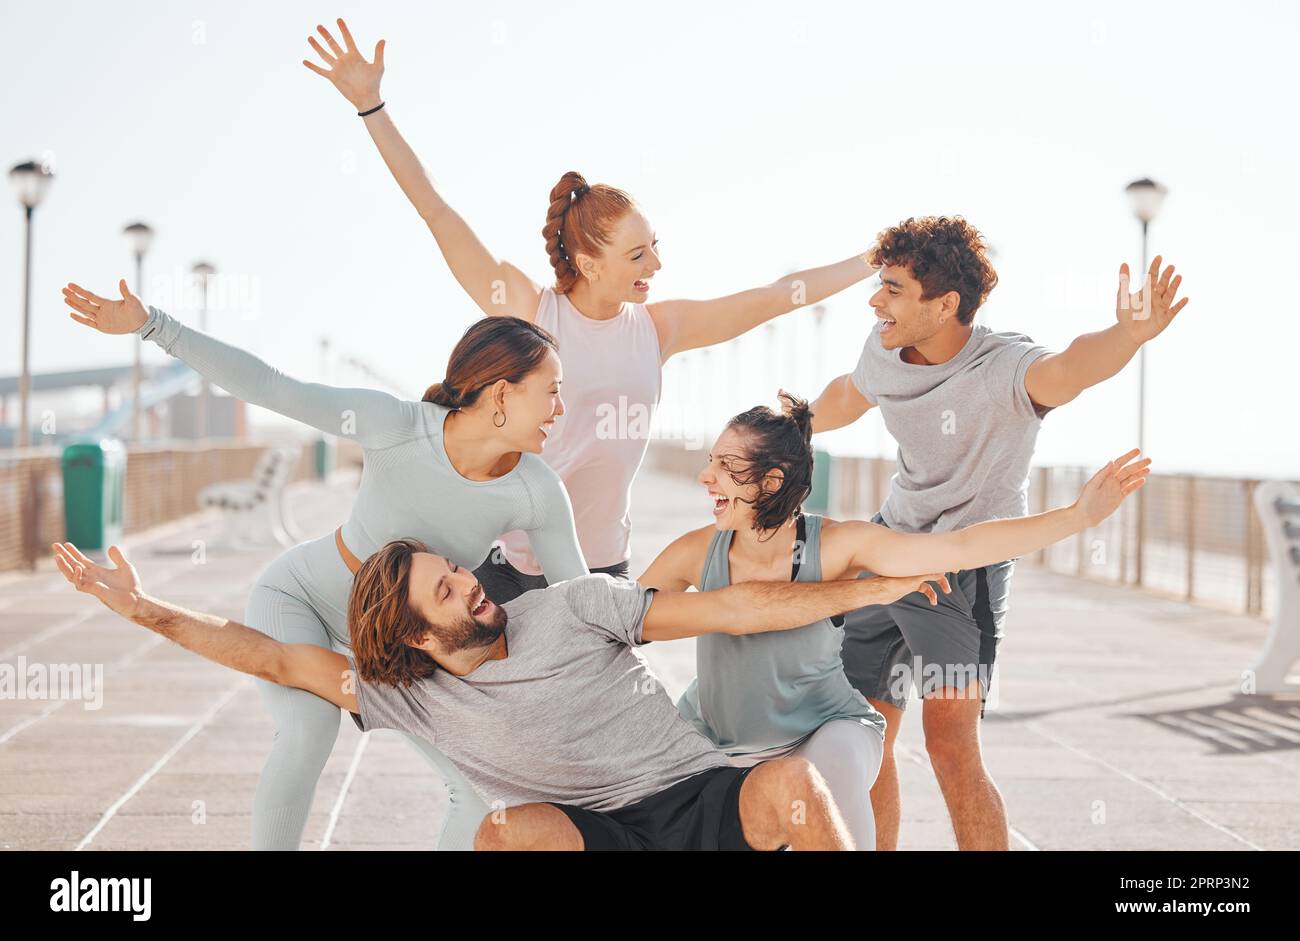 Friends, happy and excited hands outdoors while on exercise break together in gym clothes. Young social circle have goofy, silly and cheerful fun to celebrate their youth on the weekend. Stock Photo